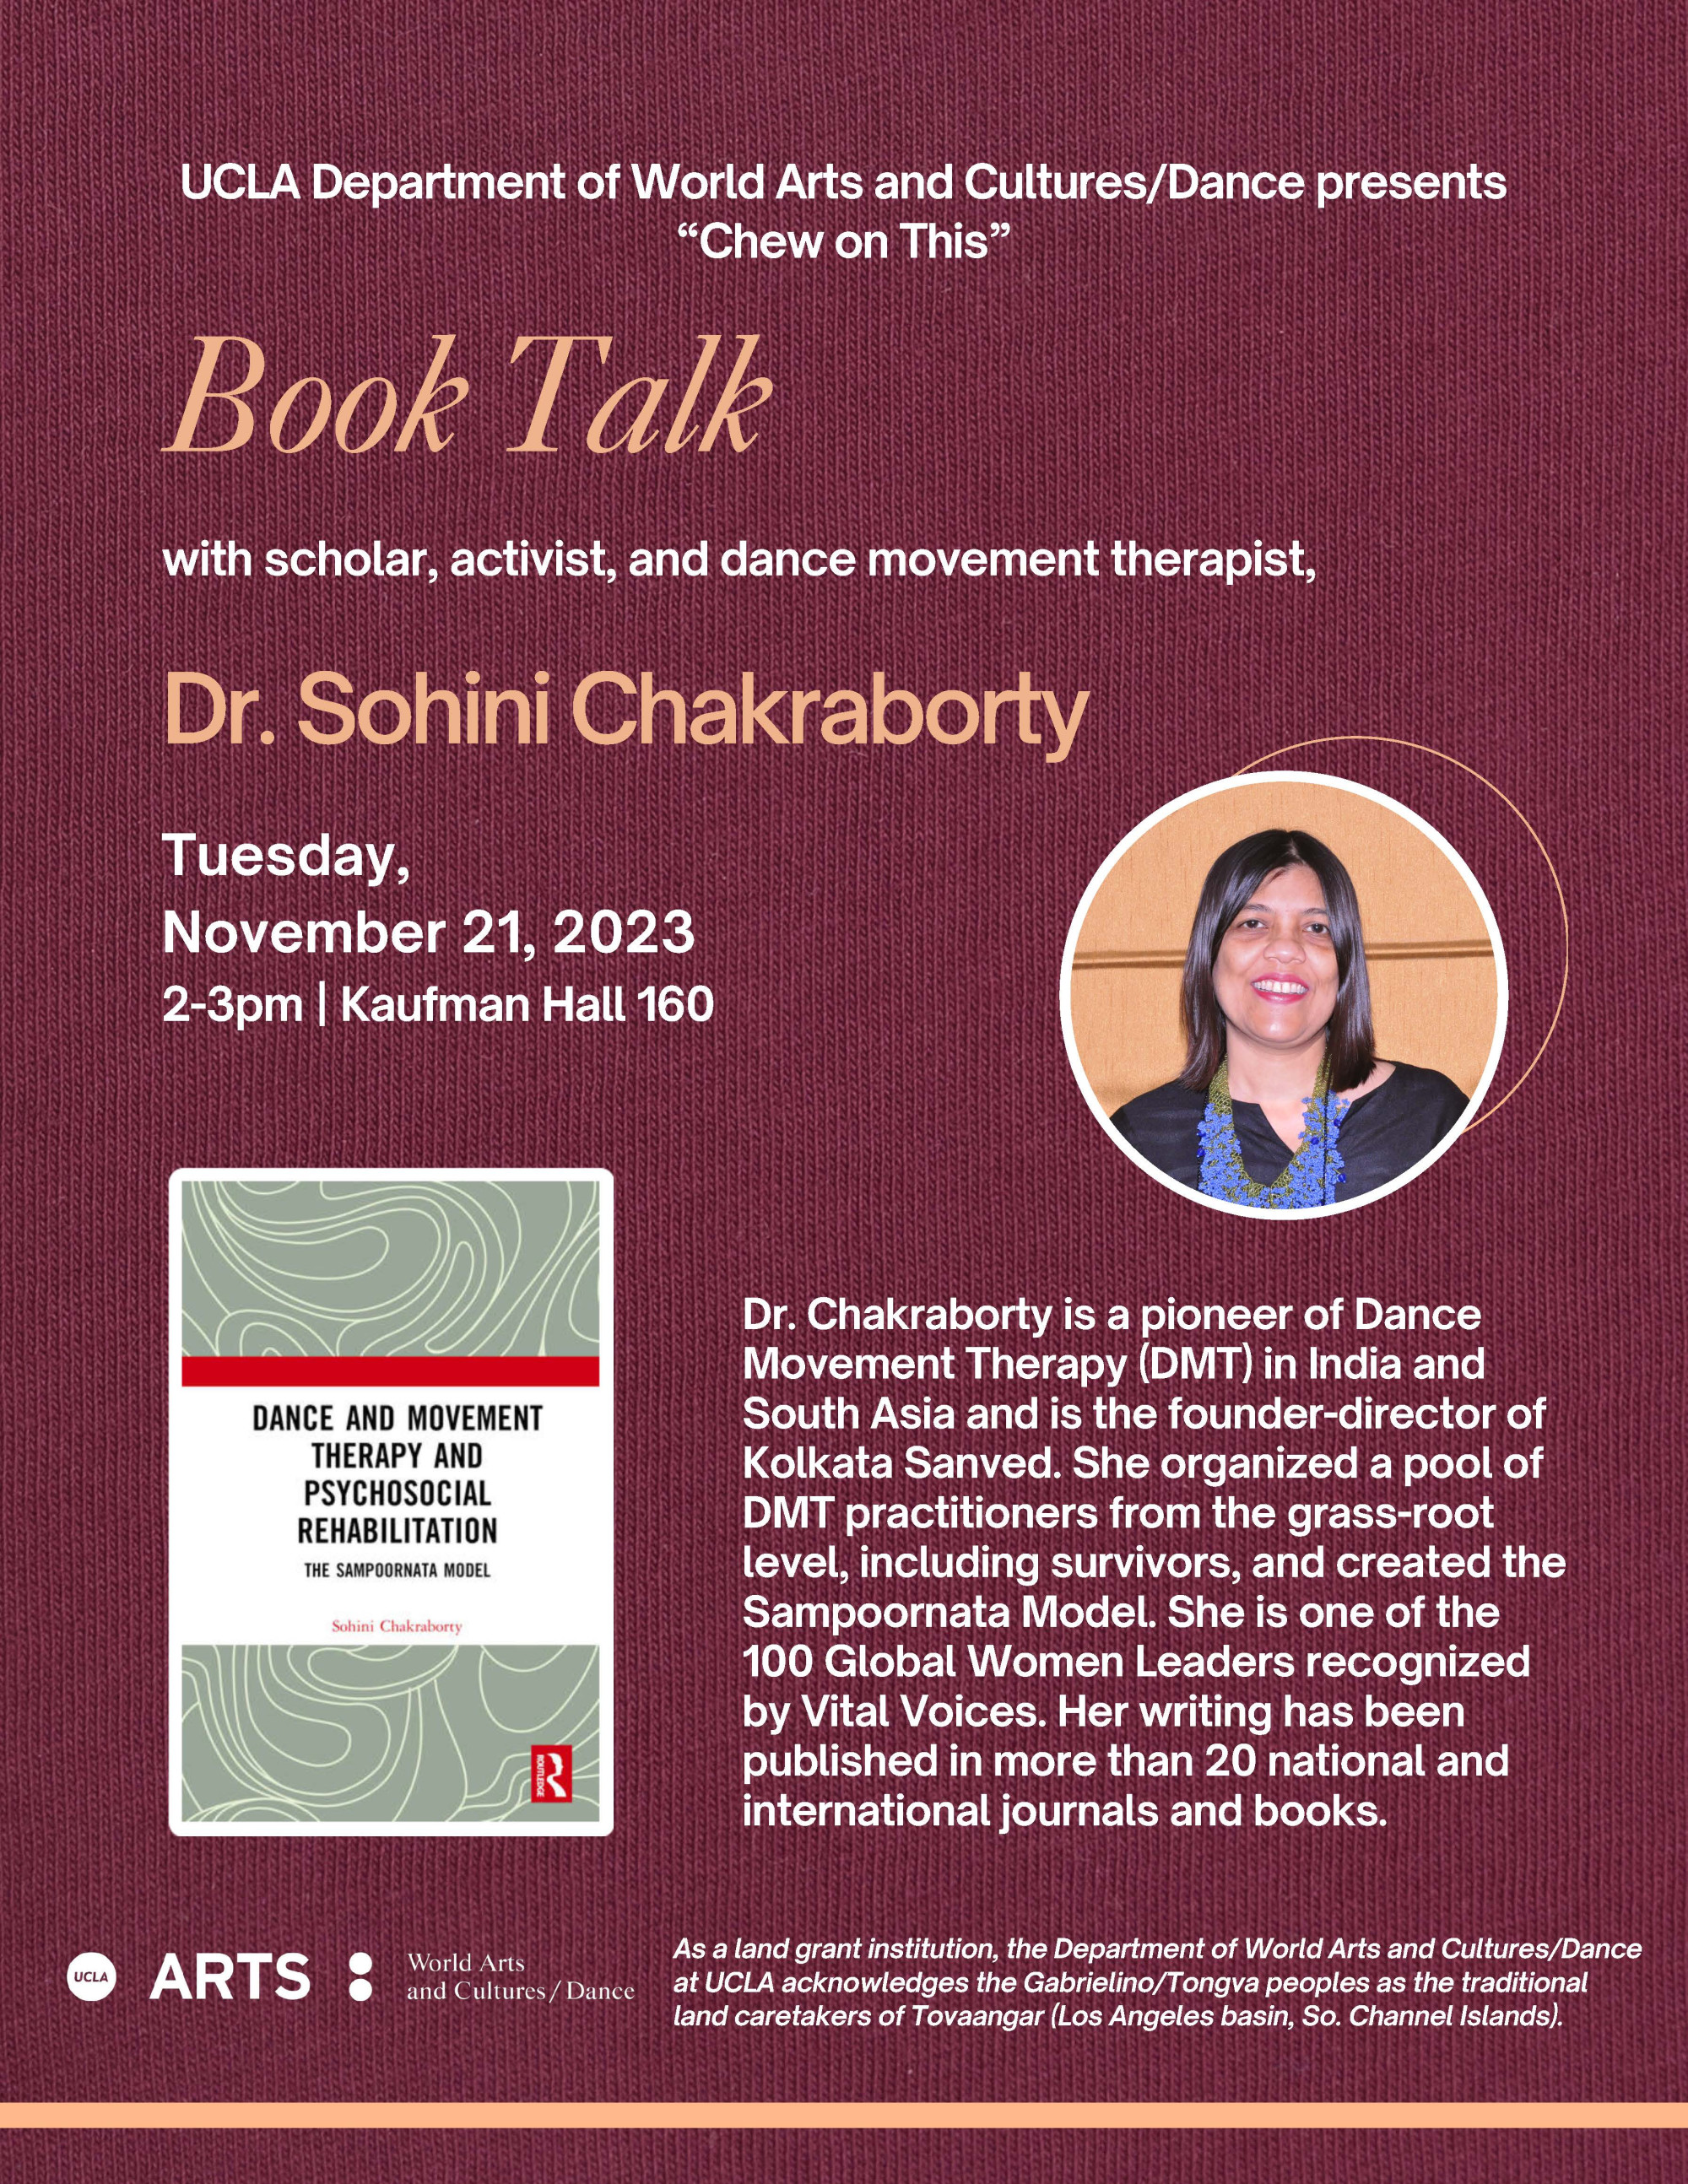 Chew on This: Book Talk by Sohini Chakraborty